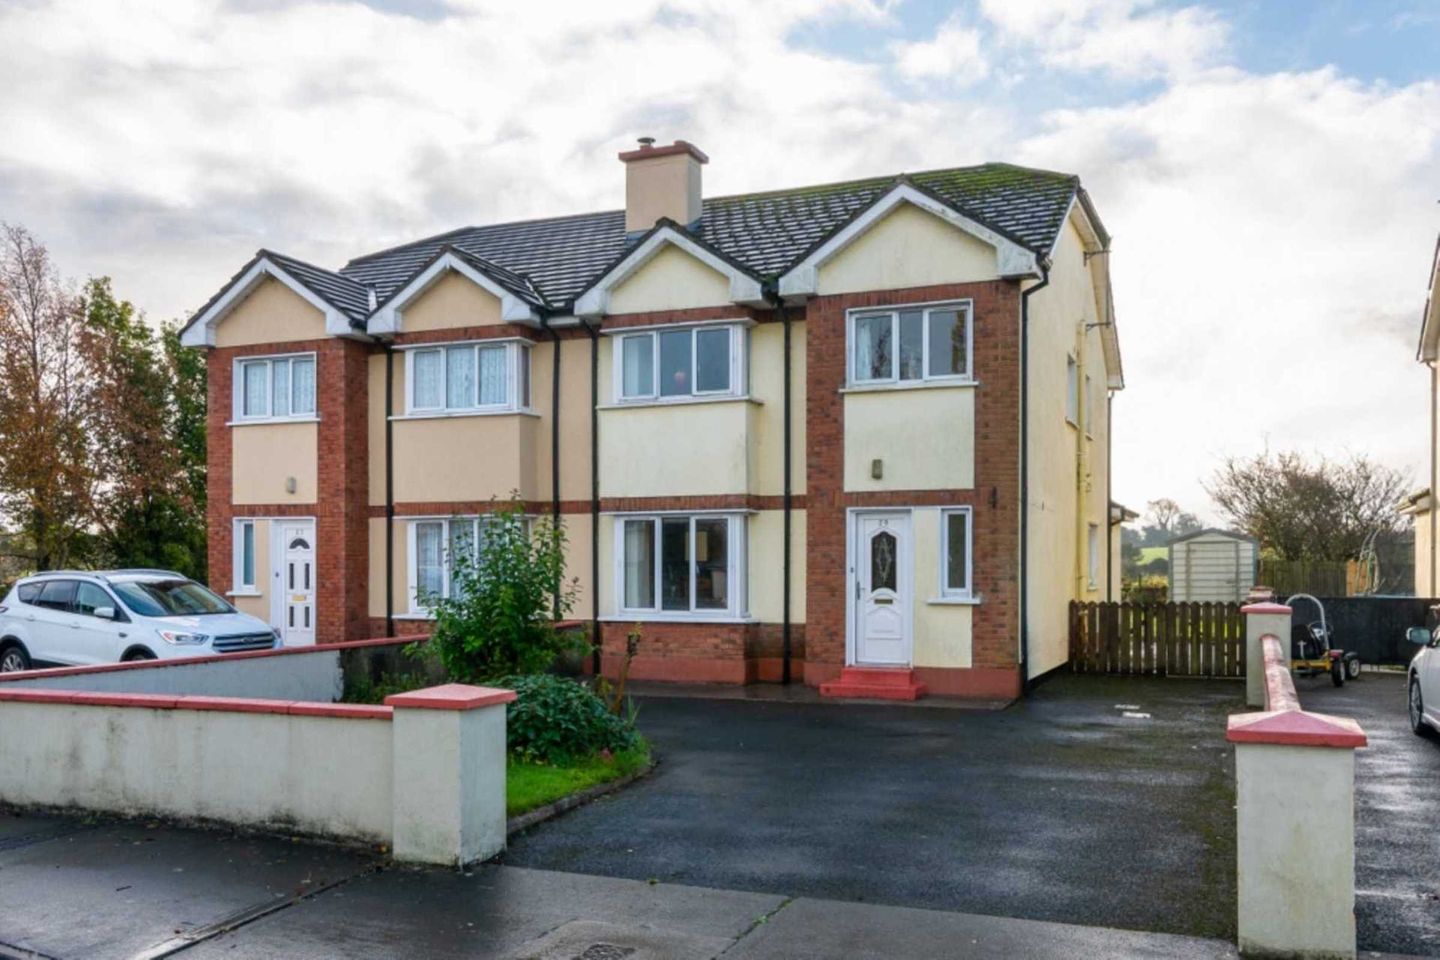 28 Glenview, Galway Road, Roscommon Town. F42 PX68, Roscommon Town, Co. Roscommon, F42PX68